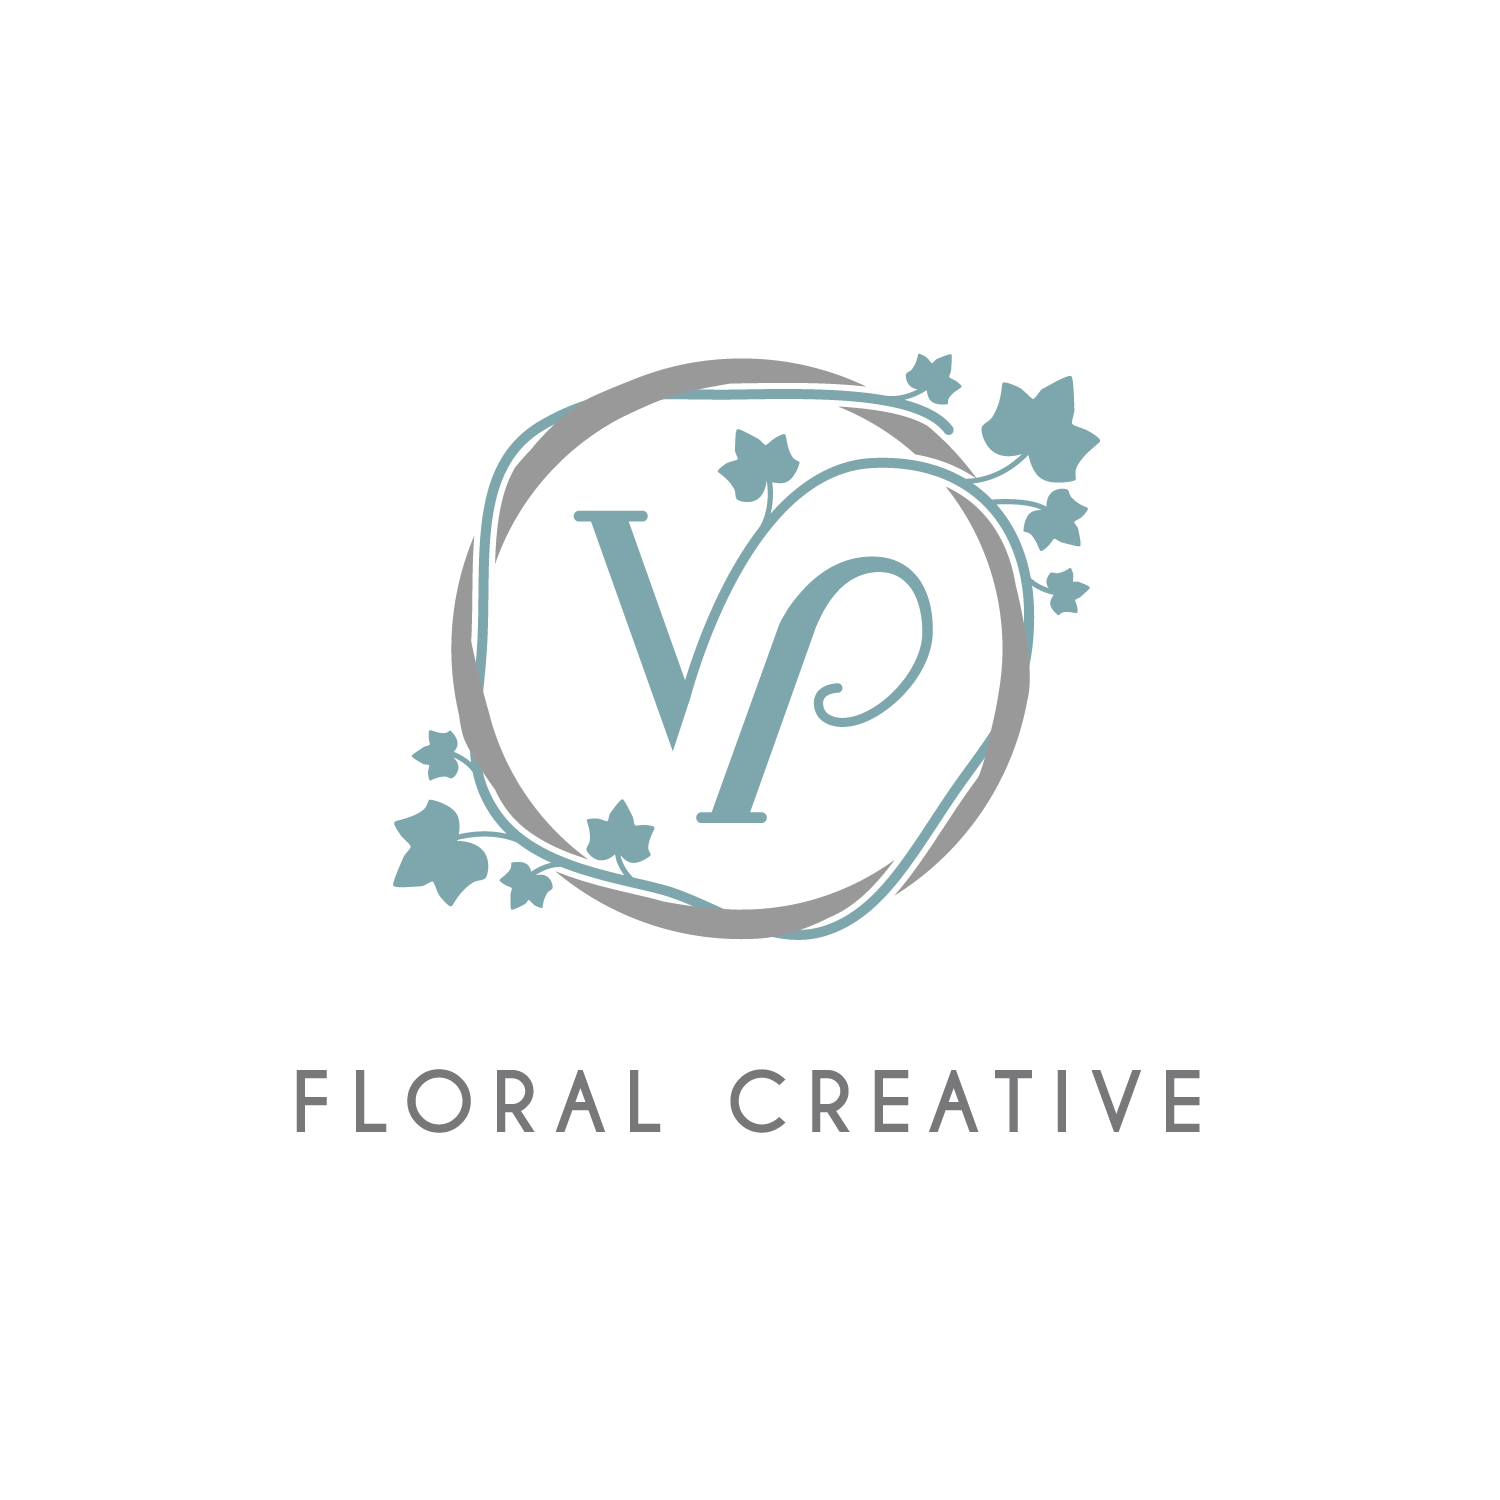 "VP" encased in a Grapevine Wreath with intertwined Ivy Vines logo with the words, "Floral Creative" underneath. 